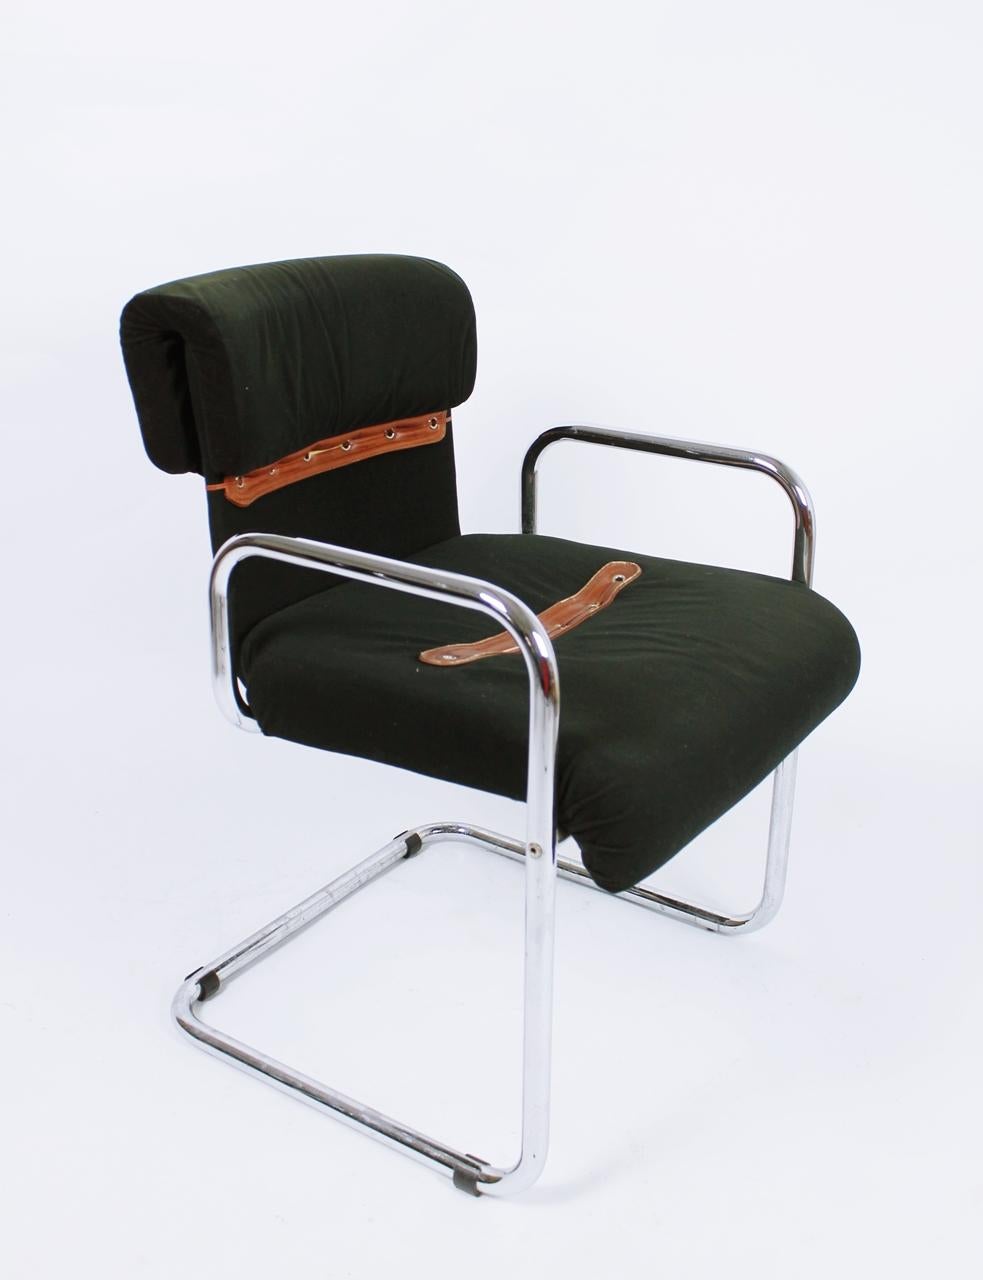 Rare fabric and chrome cantilever armchair designed by Guido Faleschini for Mariani. Retailed by Hermes, circa 1970
This set covered in fabric with leather detailing. All very comfortable indeed and with excellent vintage retro styling and all in